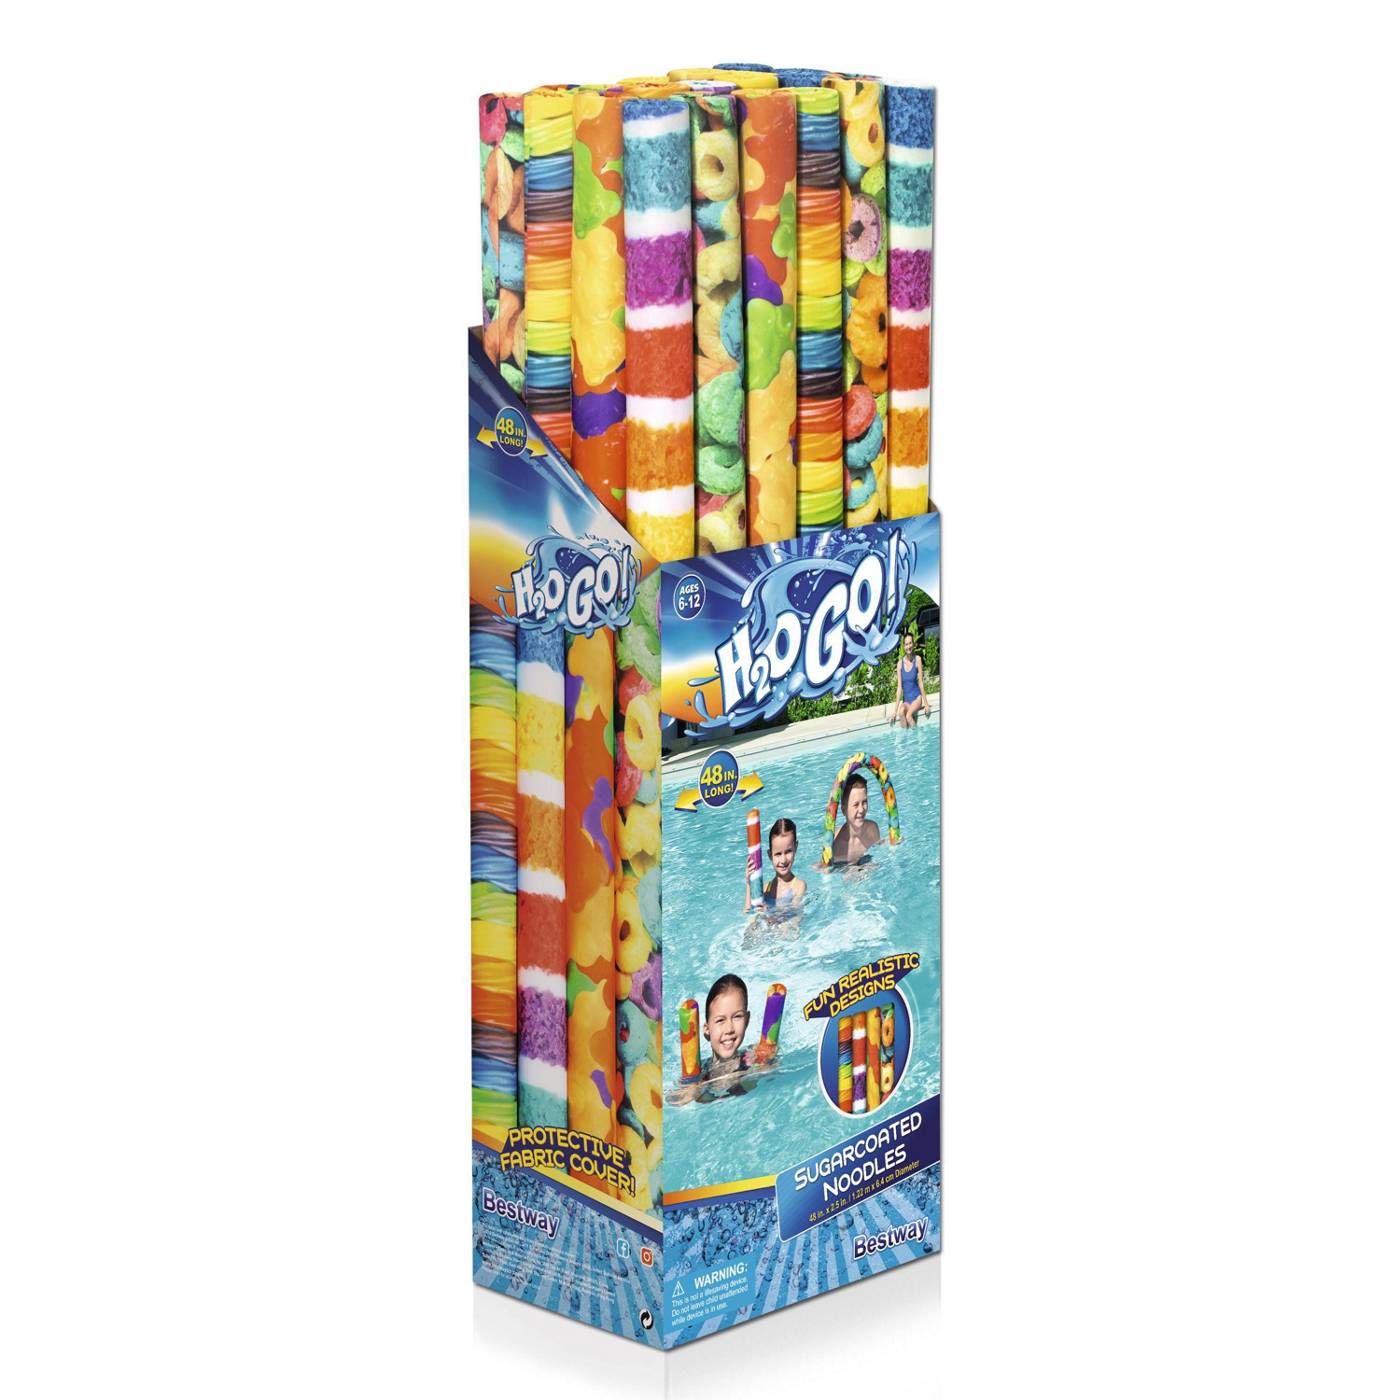 H2OGo! Fabric Cover Sugarcoated Pool Noodles, Assorted; image 3 of 3